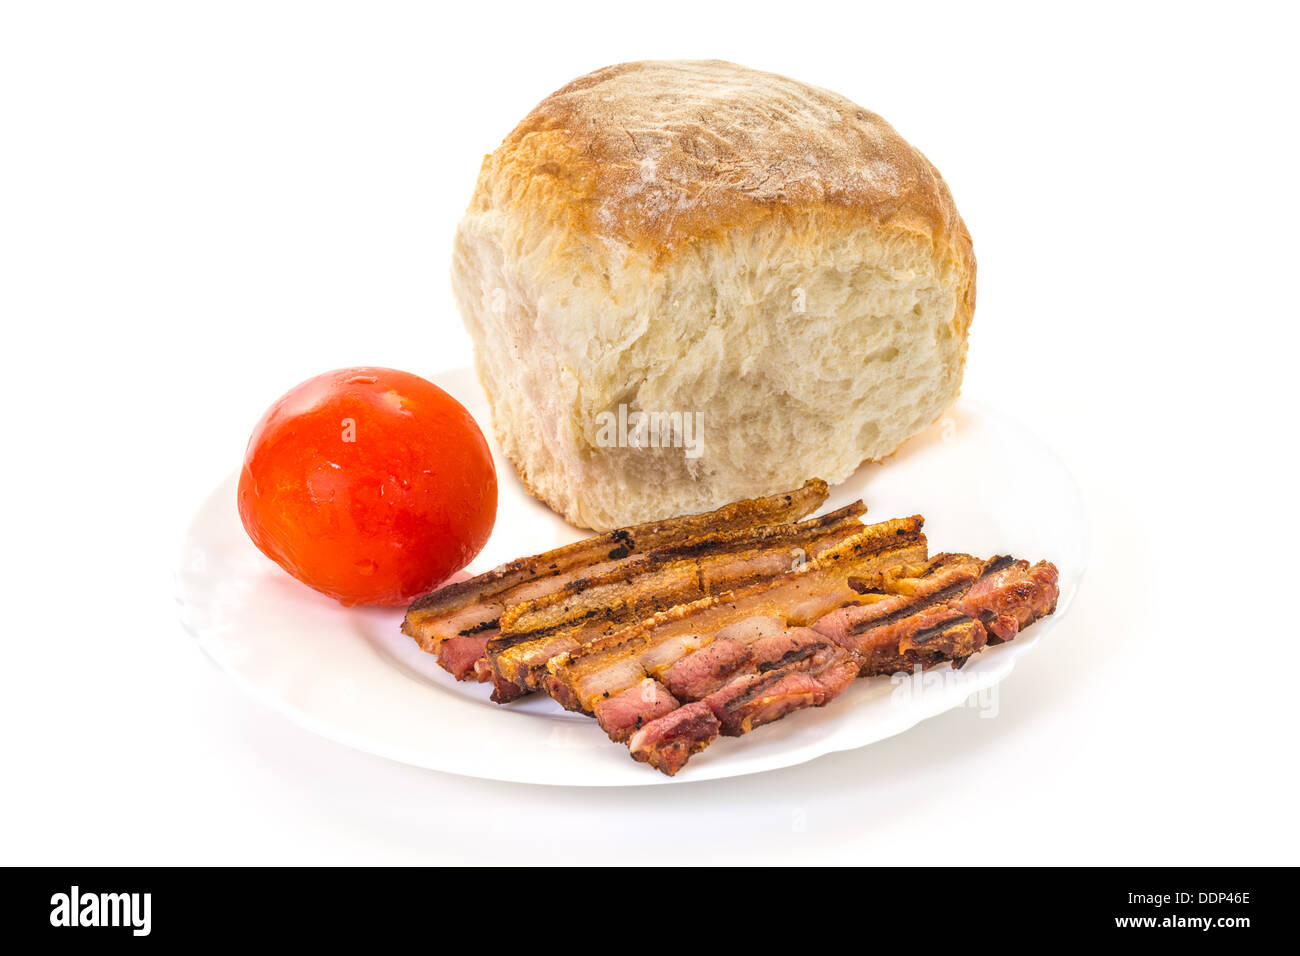 Grilled or Fried Bacon with Fresh Tomato and Bread Bun on the Plate, high key Stock Photo